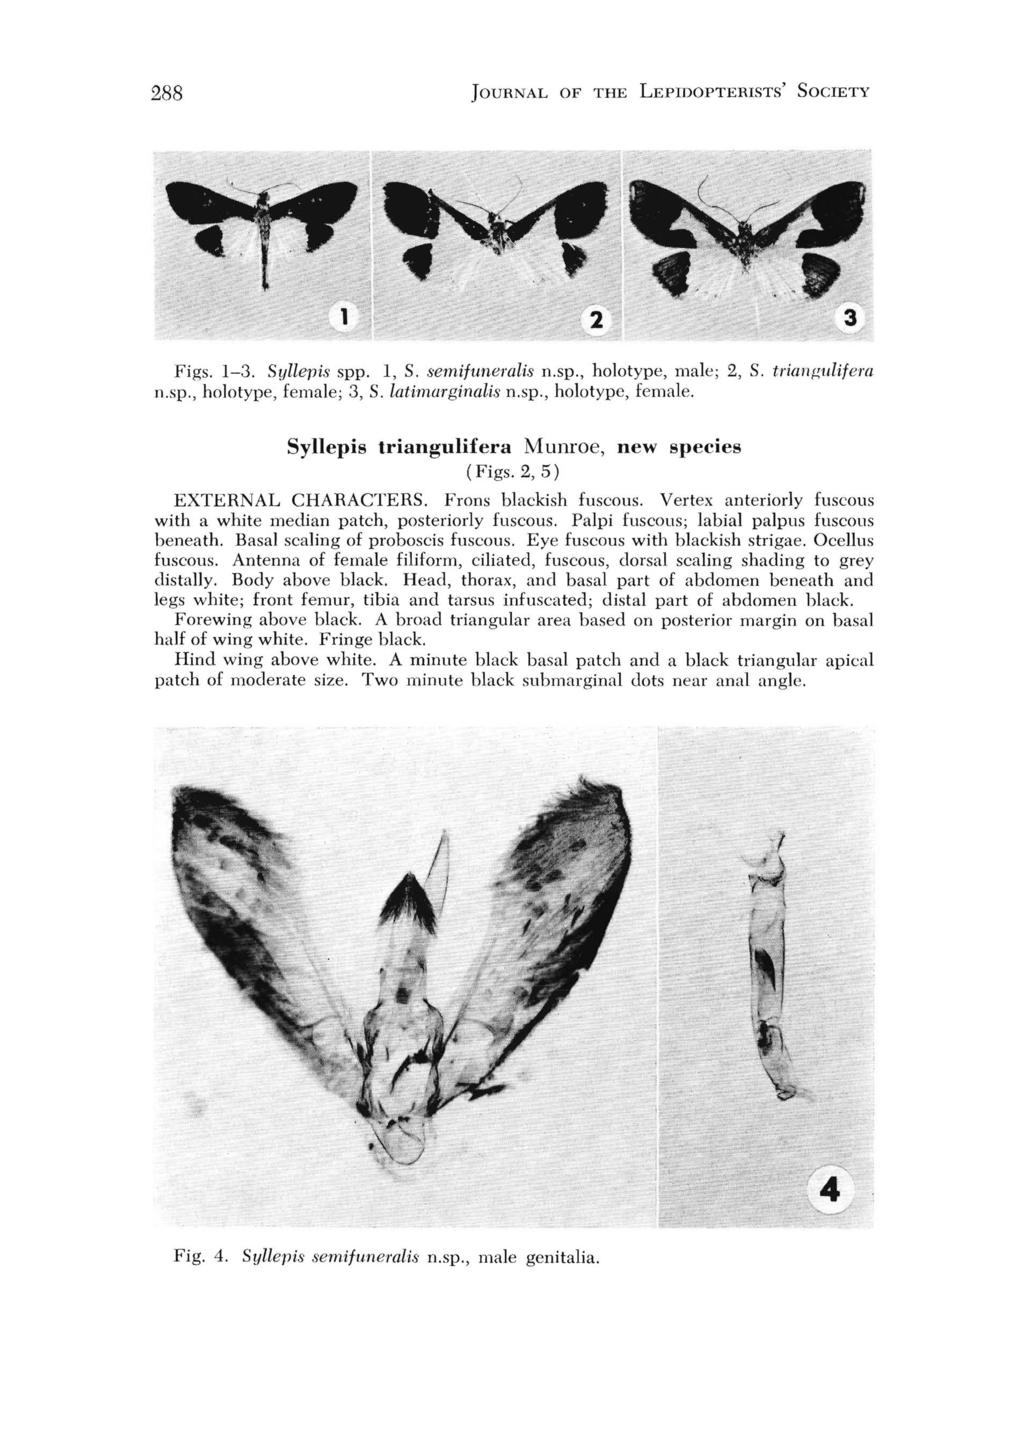 288 JOURNAL OF THE LEPIDOPTEHISTS' SOCIETY Figs. 1-3. Syllepis spp. 1, S. semifuneralis n.sp., holotype, male; 2. S. triangulifera n.sp., holotype, female;